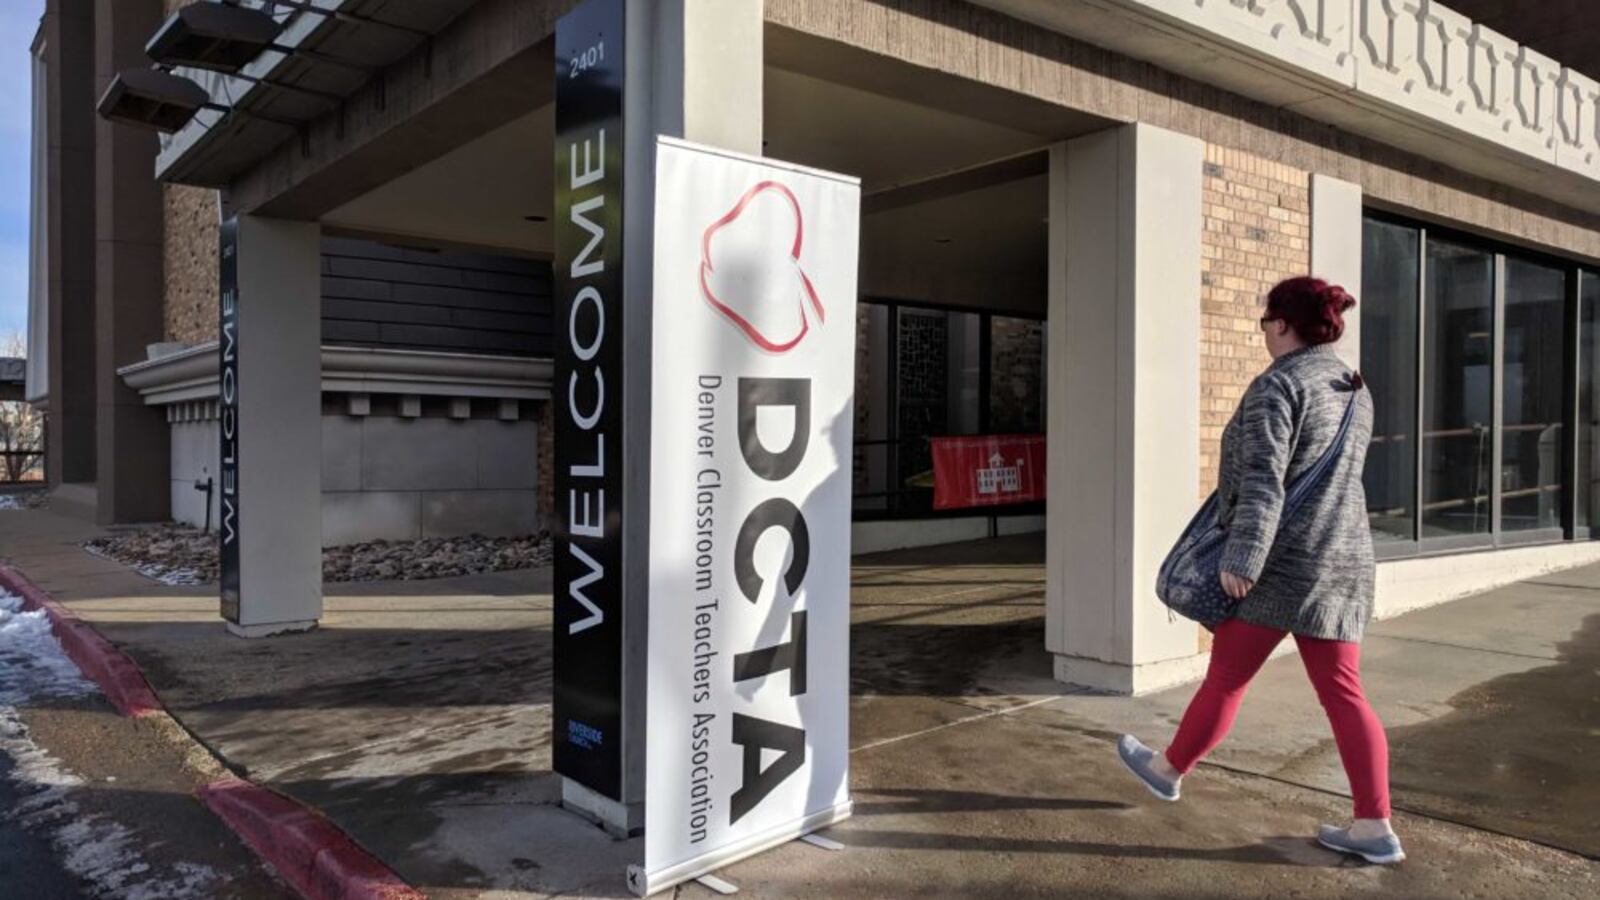 A woman wearing a coat walks into a building. The building has a banner on it that says “DCTA,” which stands for Denver Classroom Teachers Association.